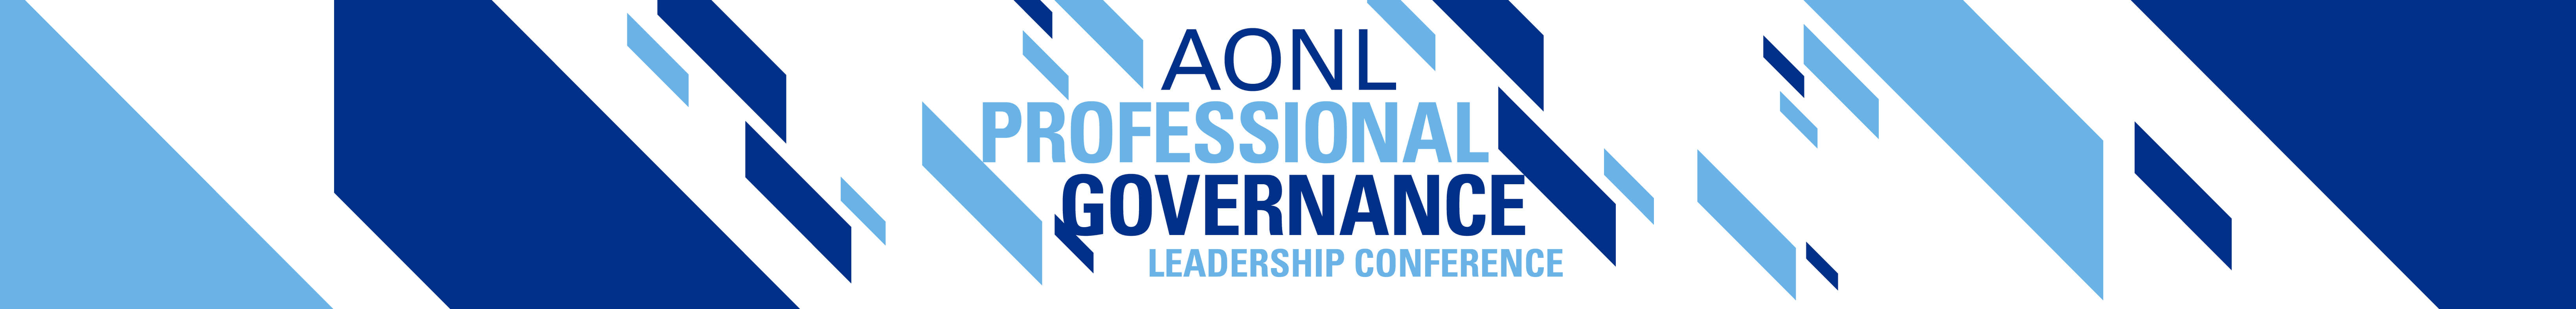 Professional Governance Conference